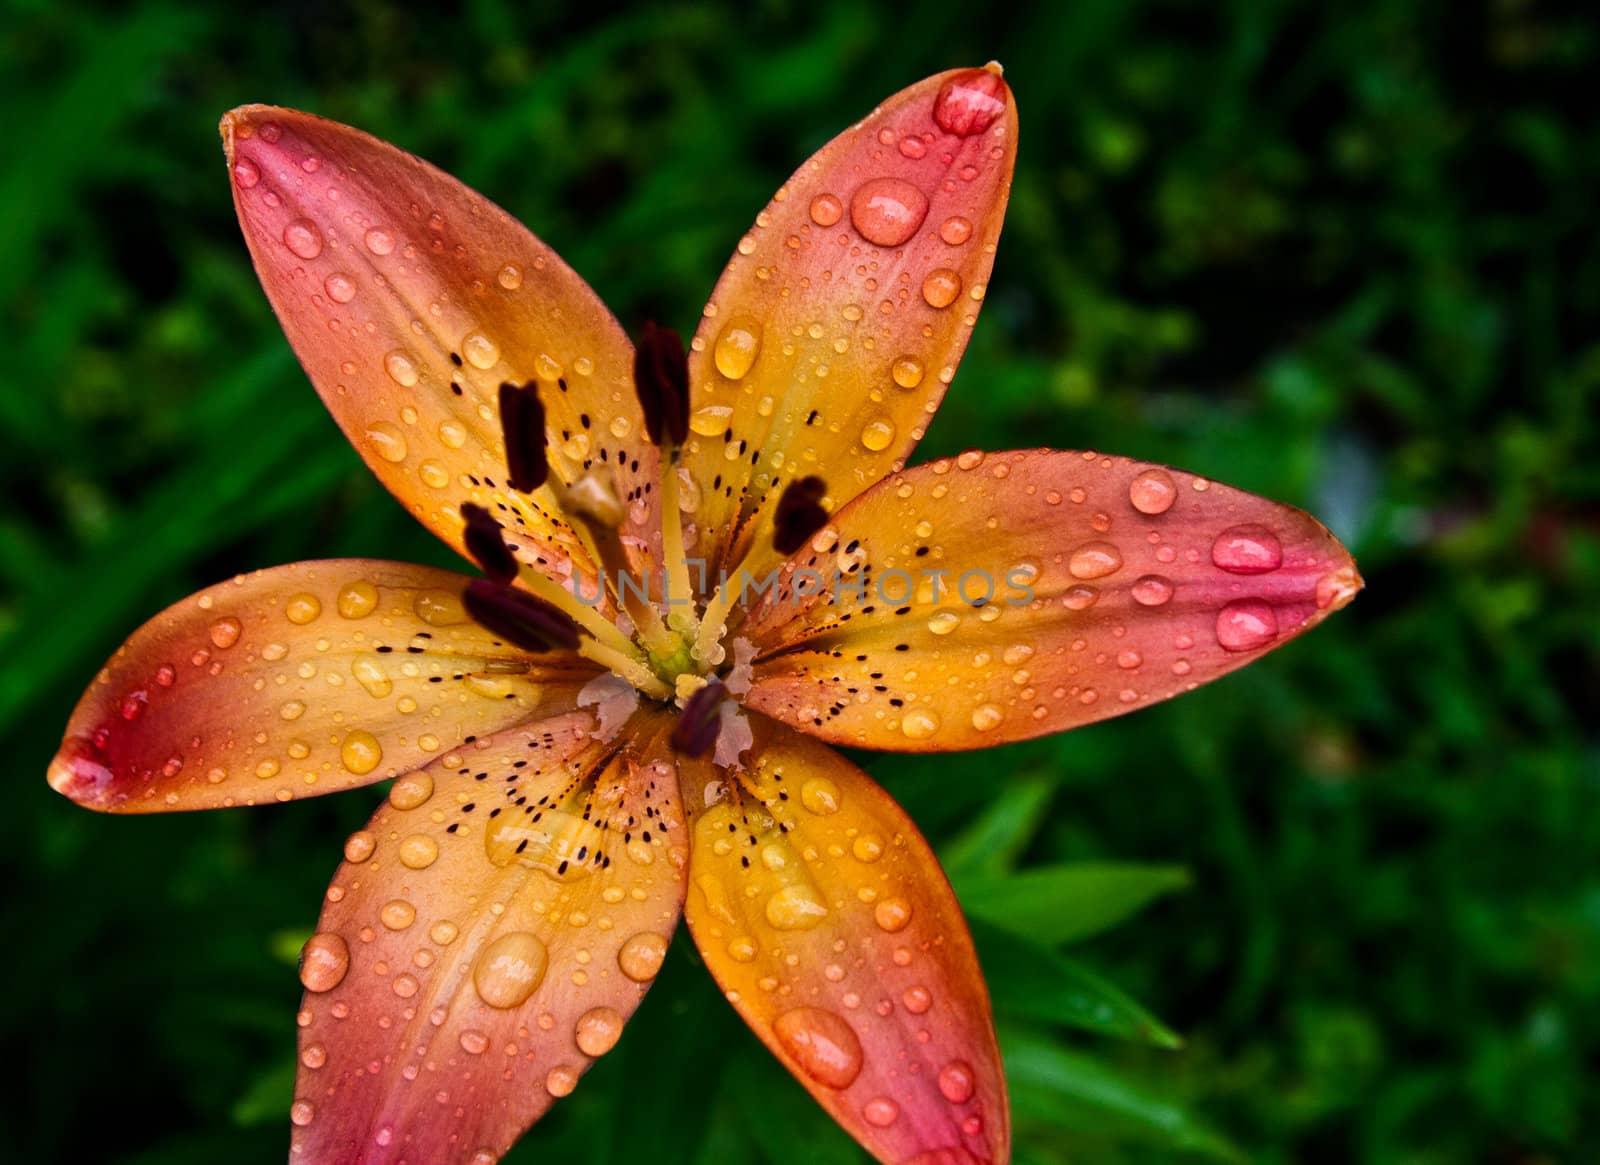 Rain drops on a multiple color Asiatic Lilly bloom